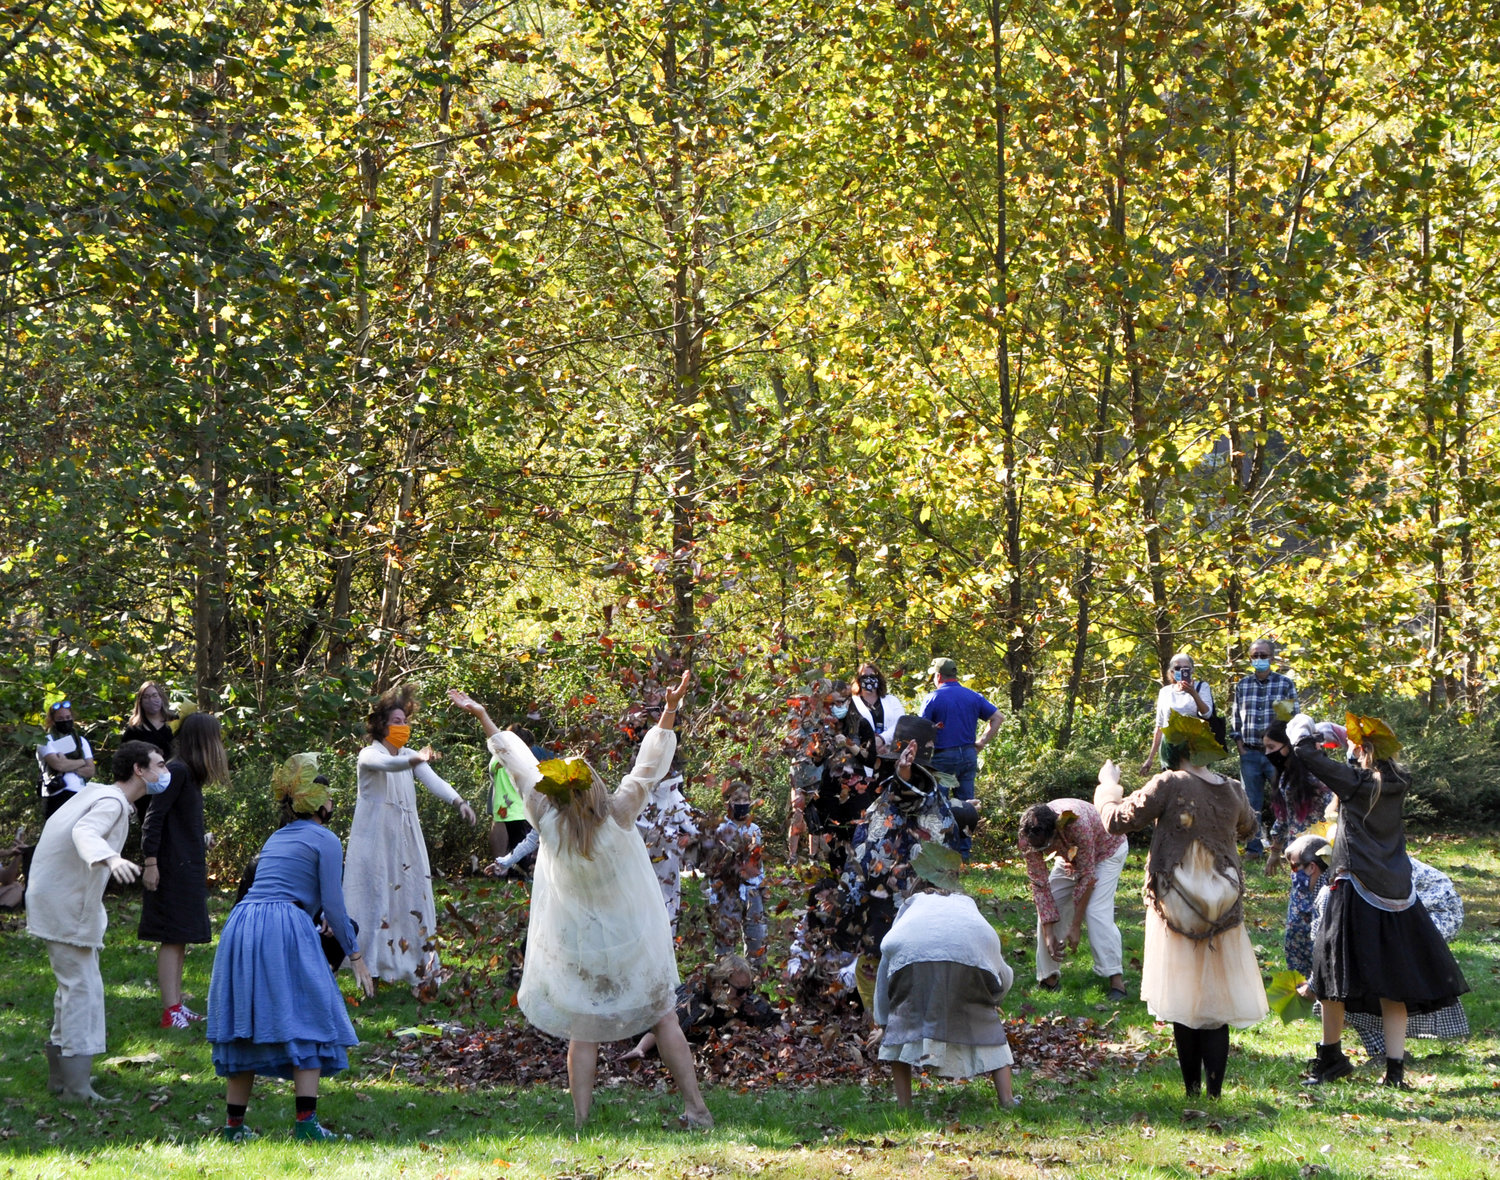 Callicoon boutique Pip Squeak Chapeau staged a dramatic fashion show at the hamlet’s new park.